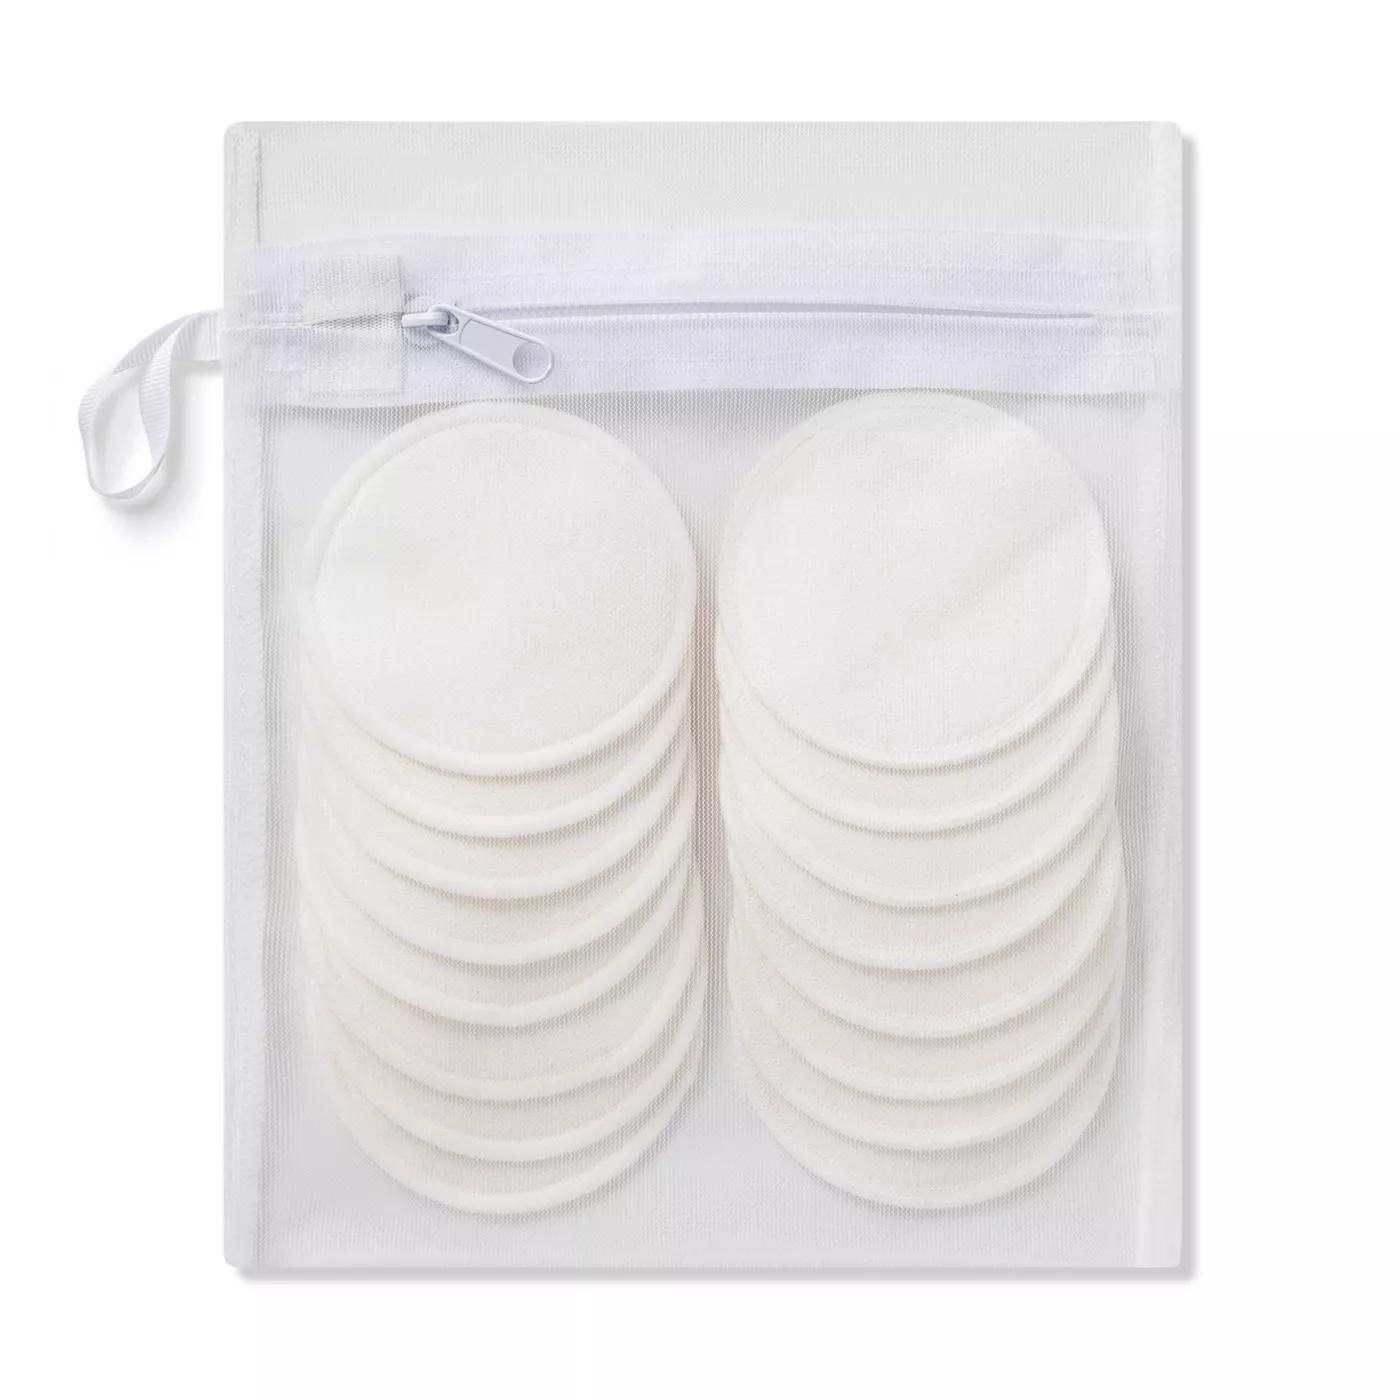 Reusable Make Up Removing Cotton Rounds with Washable Bag - up & up™ - image 1 of 4